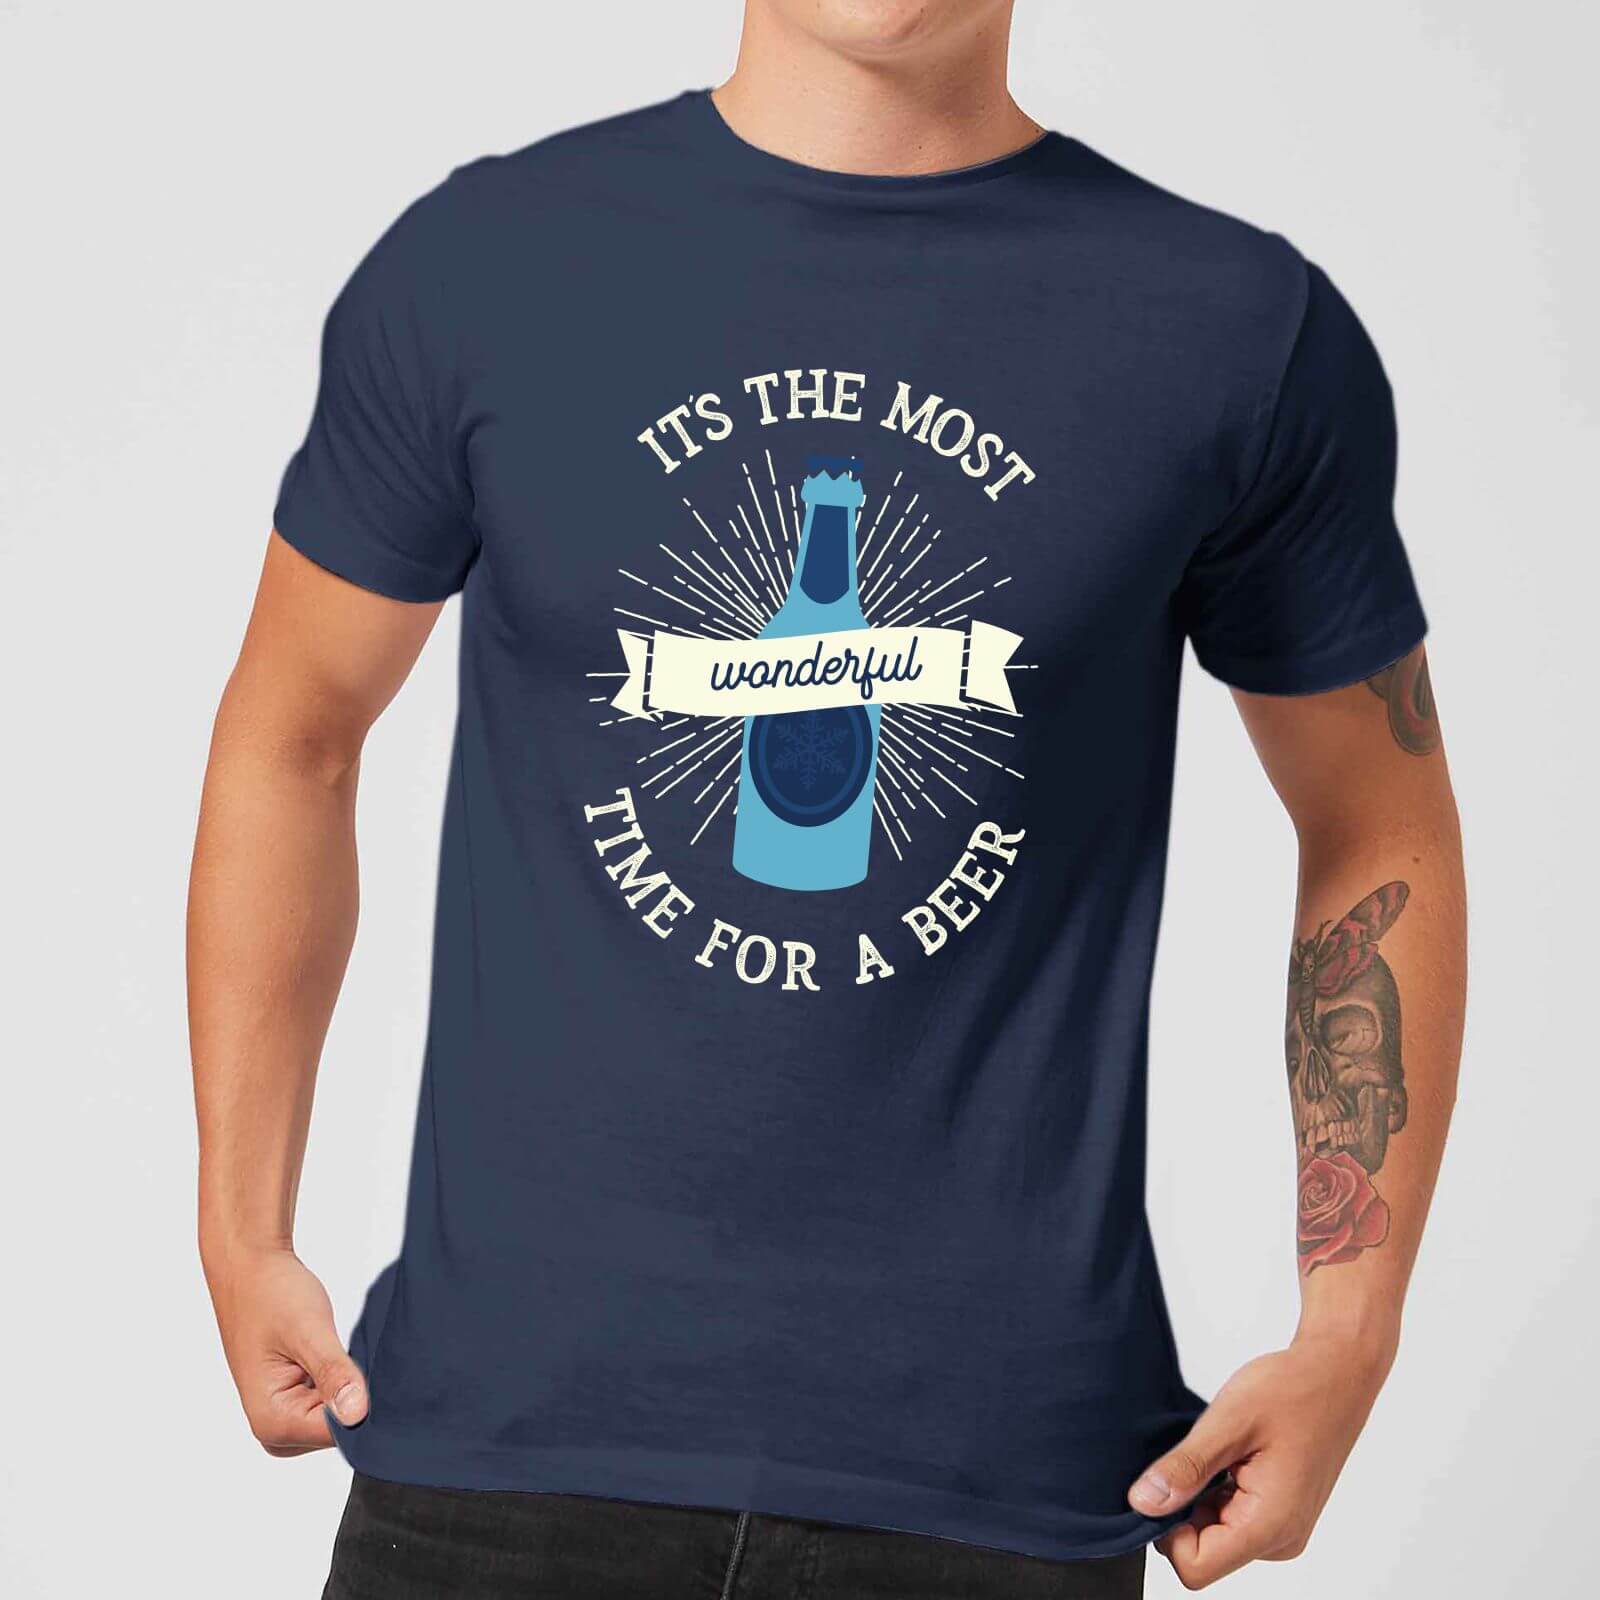 It's The Most Wonderful Time for A Beer Men's Christmas T-Shirt - Navy - S